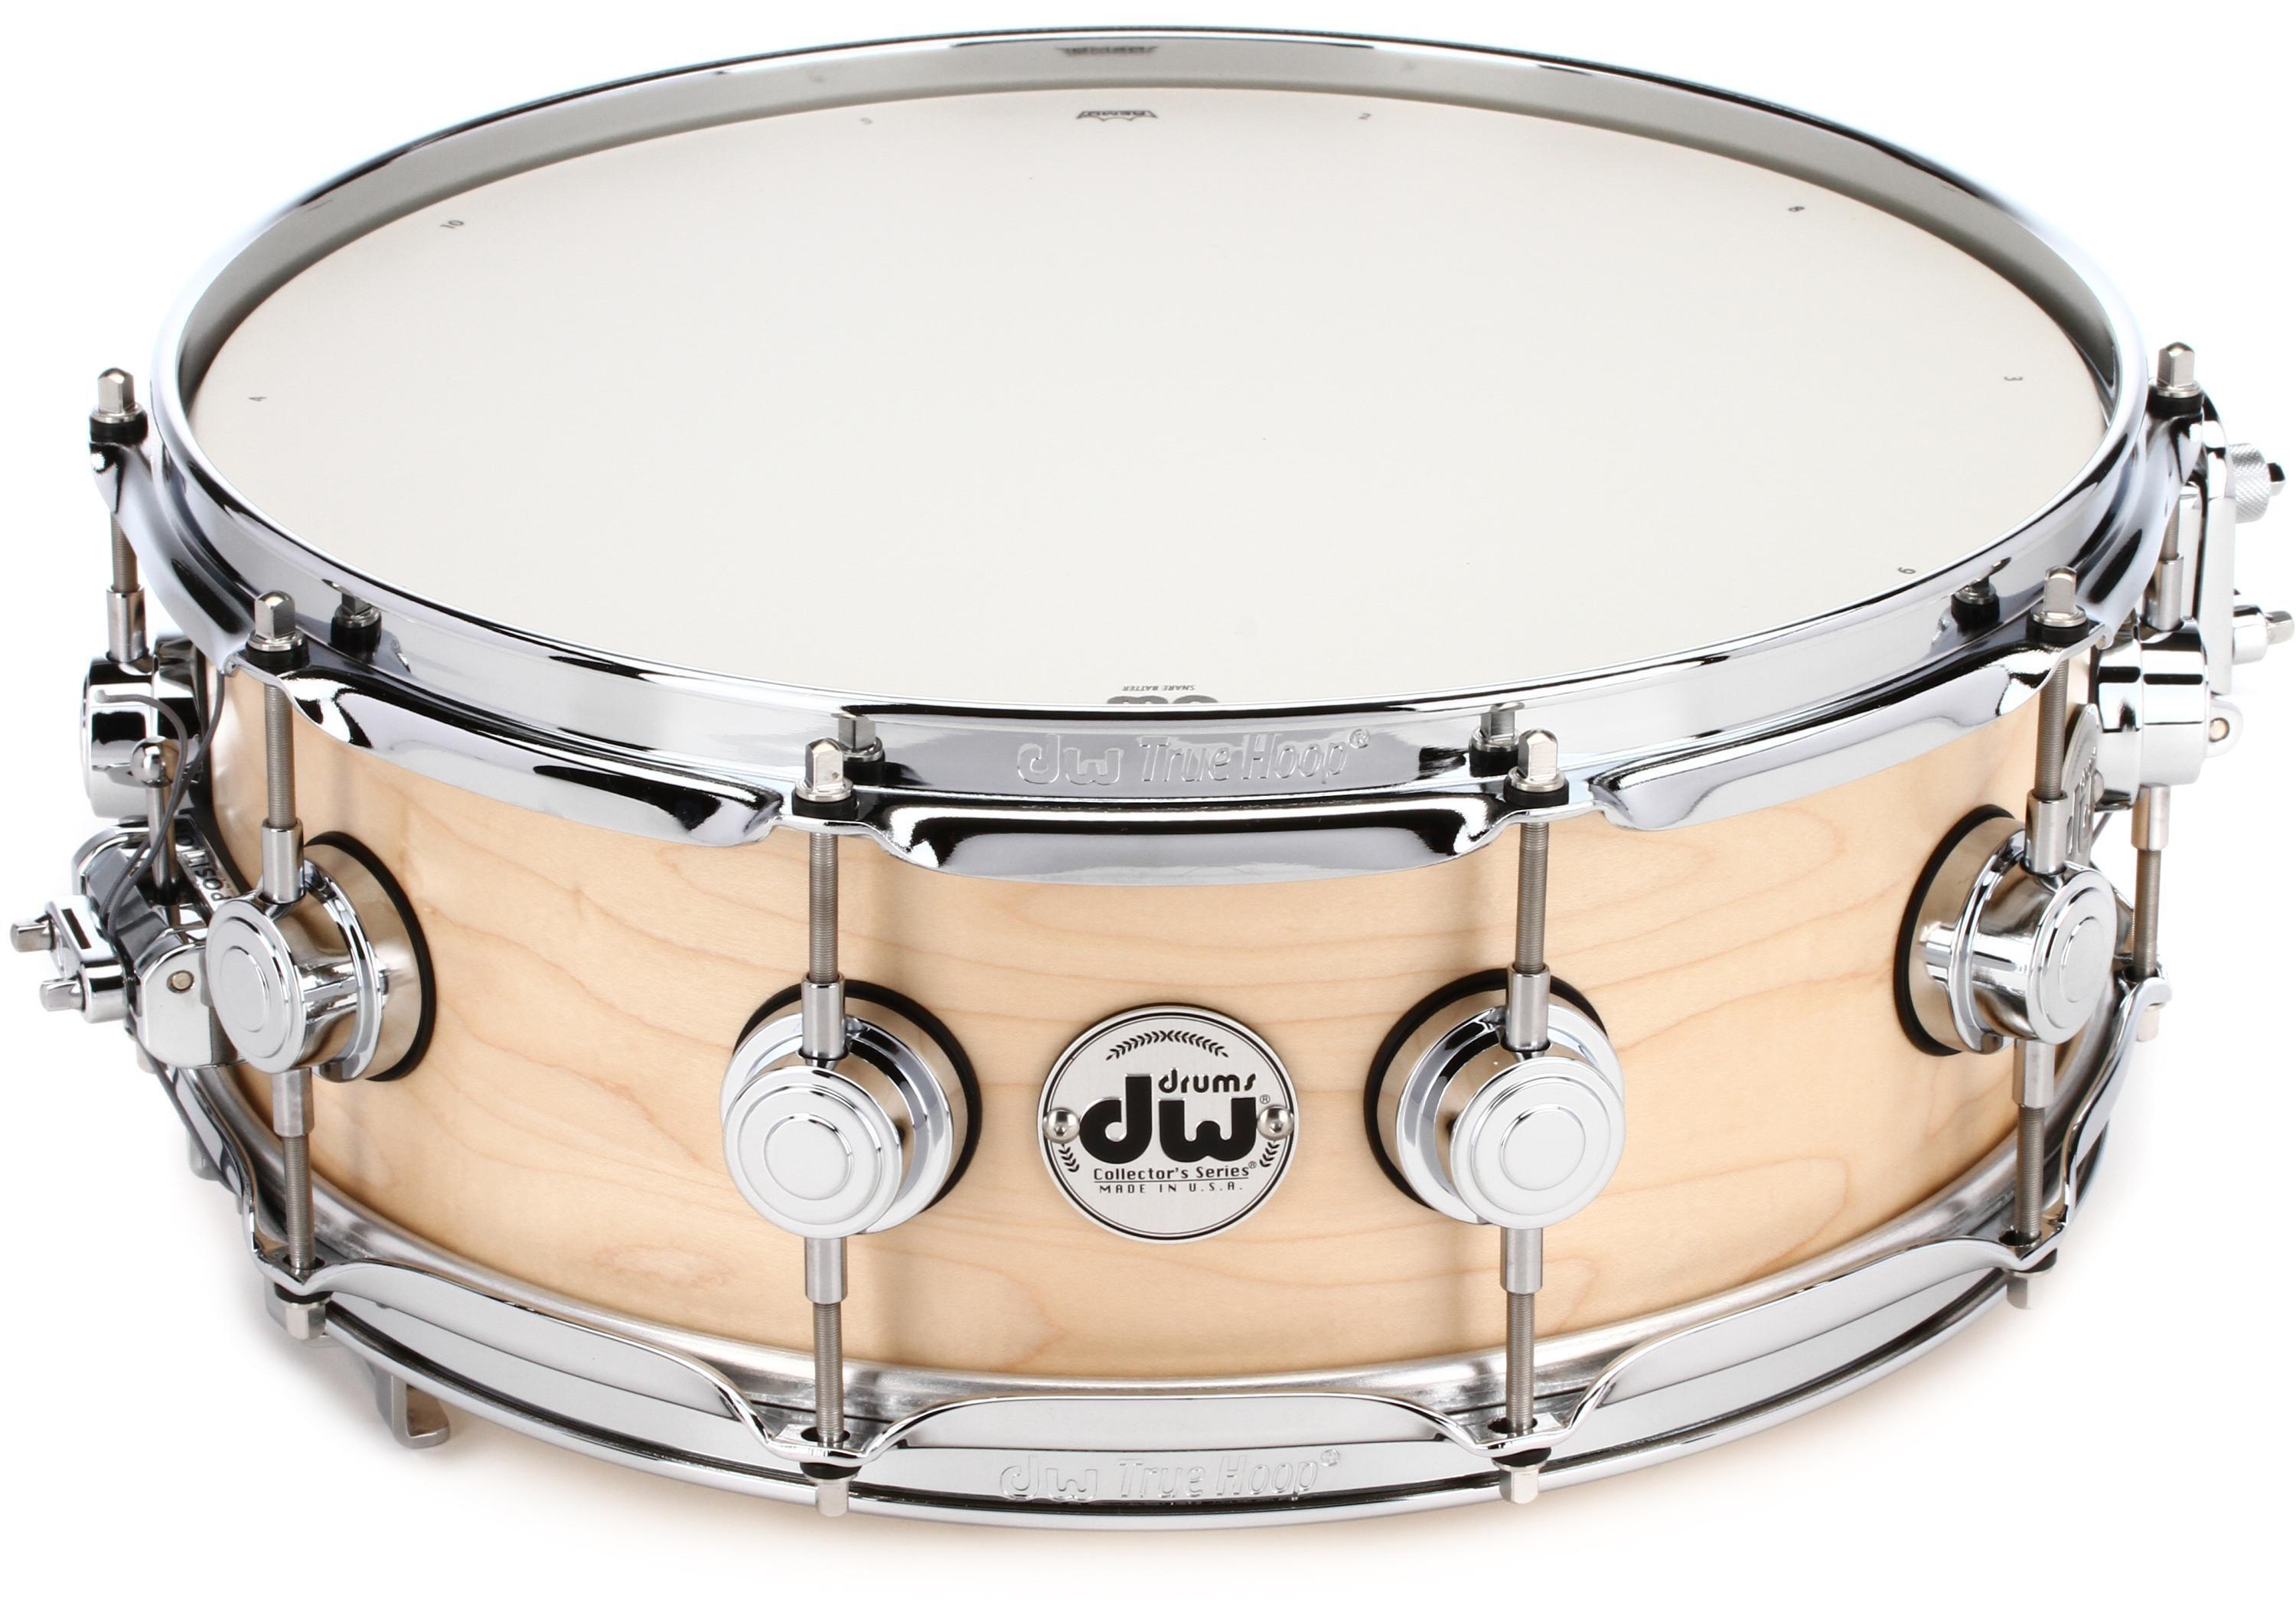 Collector's Series True Sonic Snare Drum - 5 x 14 inch - Natural